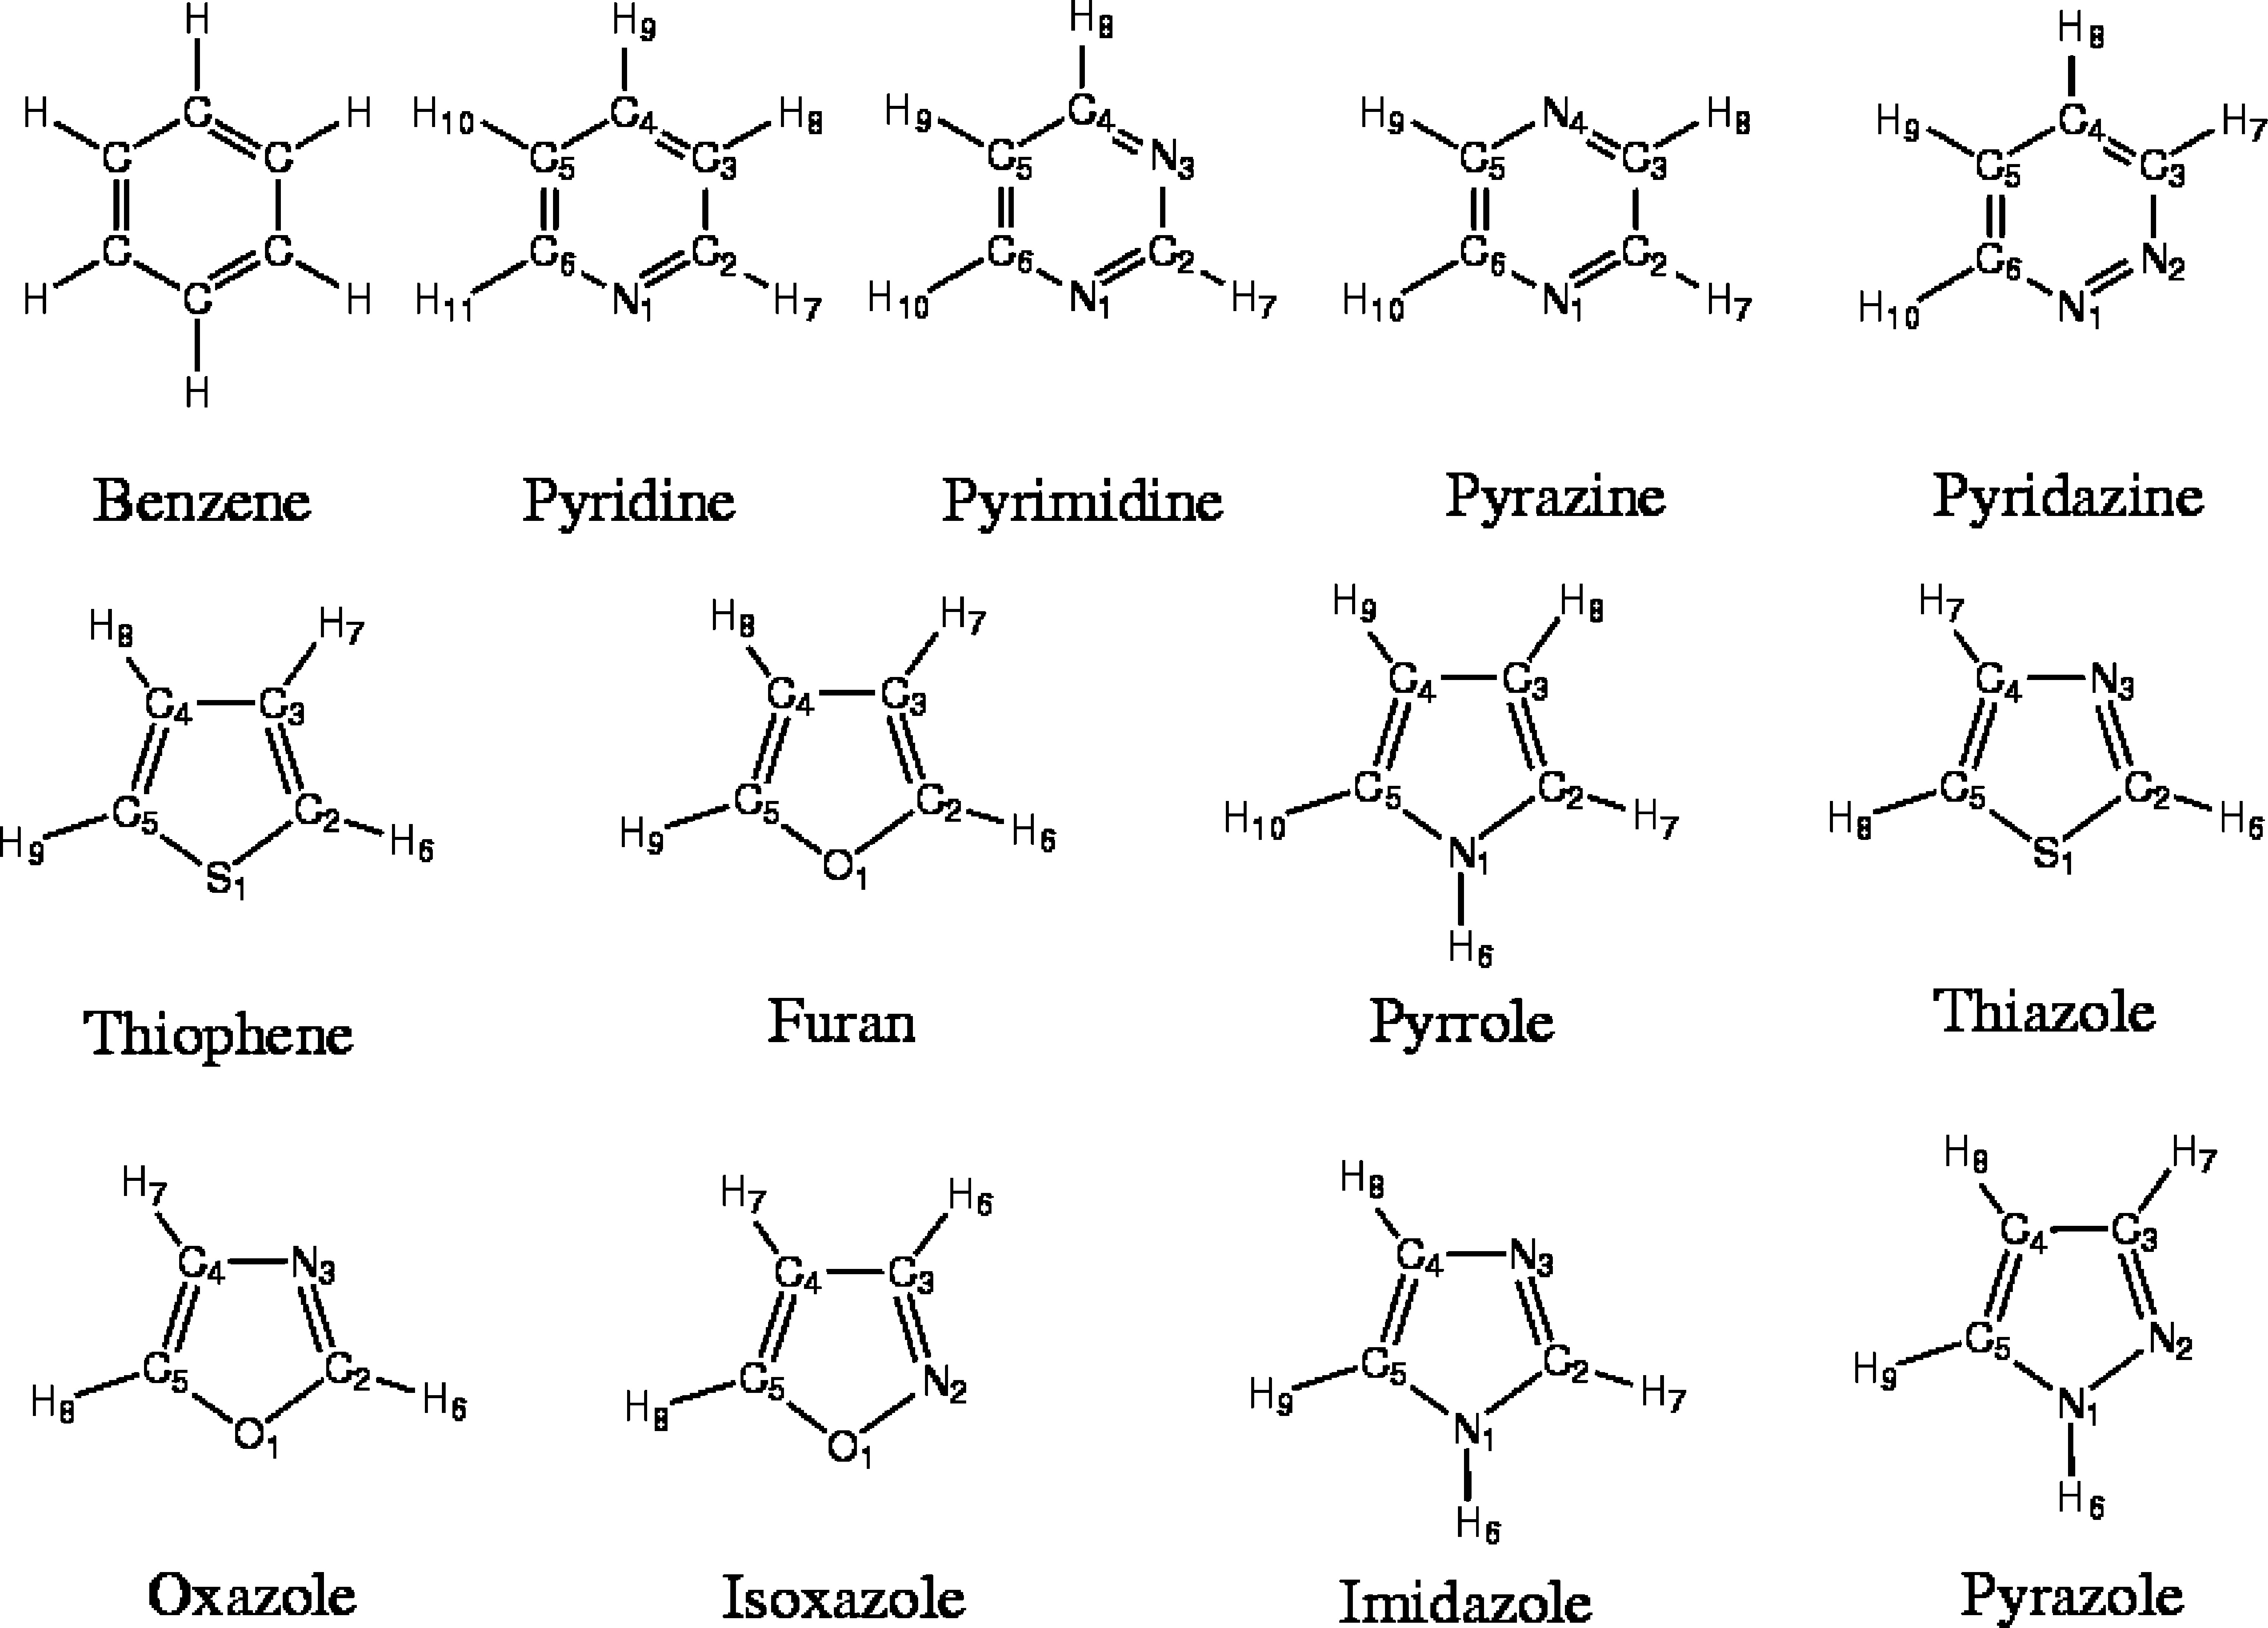 Transferable Potentials for Phase Equilibria. 9. Explicit Hydrogen Description of Benzene and Five-Membered and Six-Membered Heterocyclic Aromatic Compounds